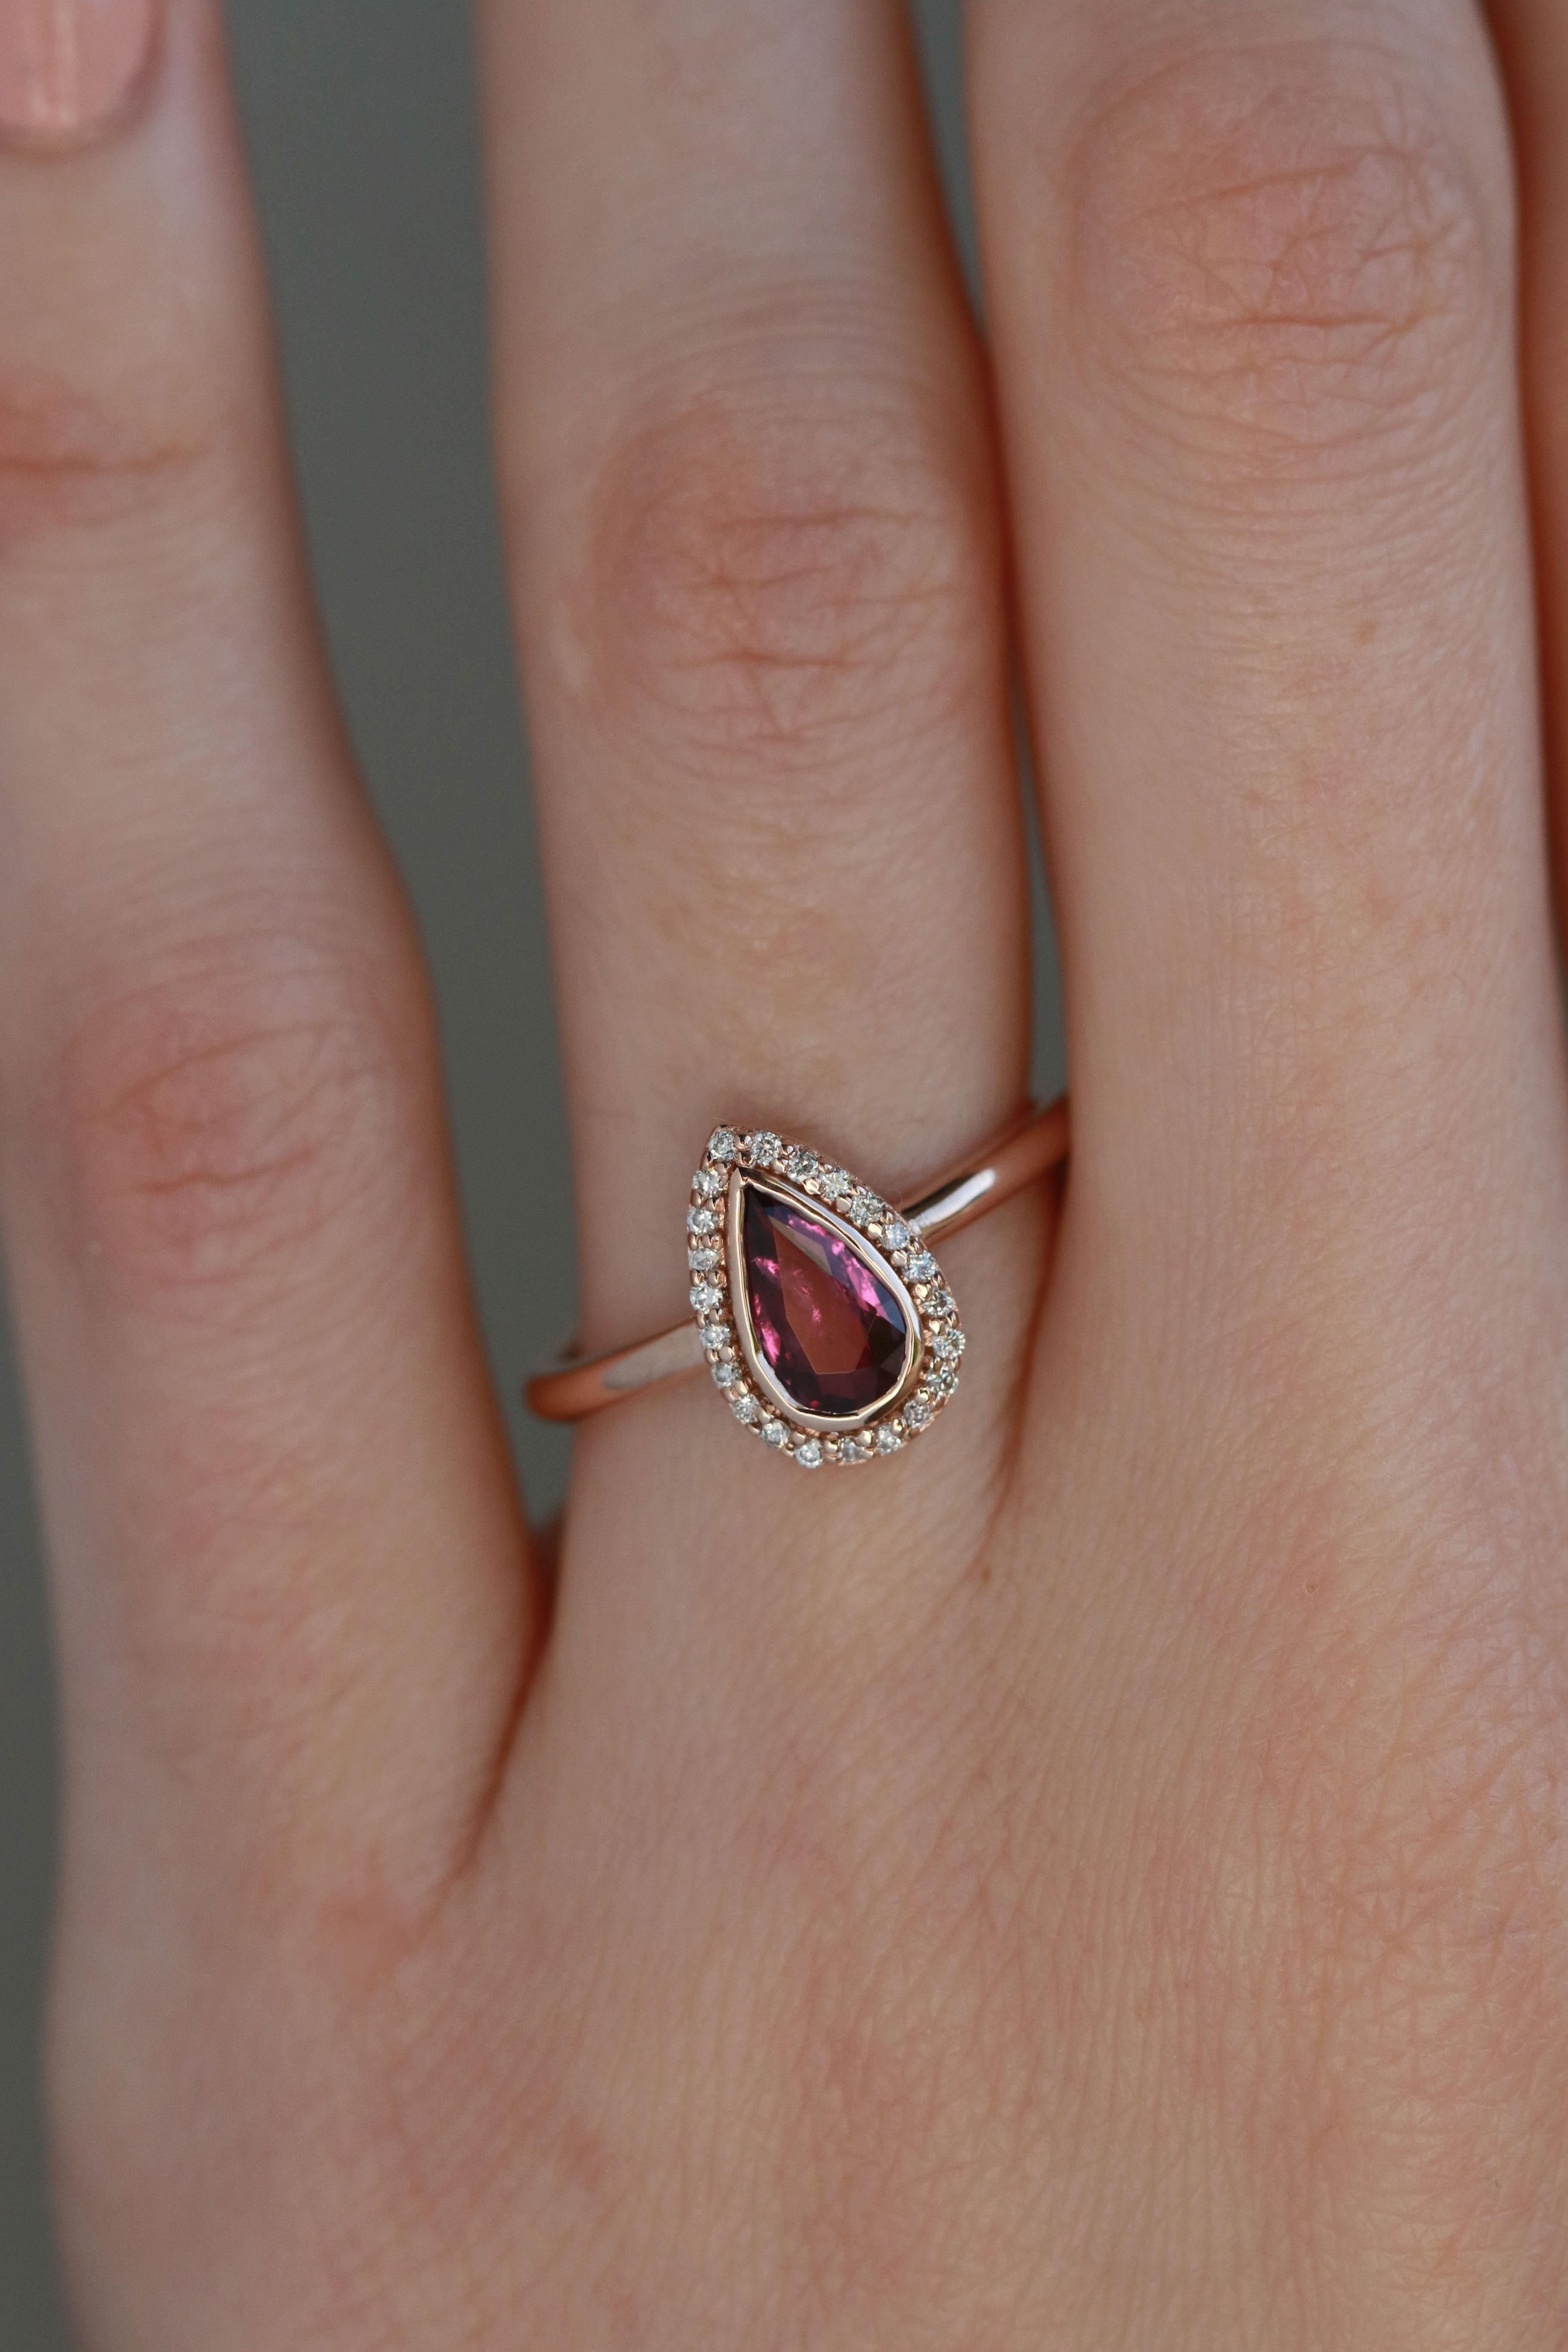 A fancy rosecut pear ruby is surrounded by 22 tiny white diamonds arranged in a halo to mimic the shape of the center stone. Finished in 14k rose gold to enhance the warm tones of the ruby.

Stones:
Ruby Rosecut Pear, 7.9x4.5x2.4mm - 0.7 carats
22